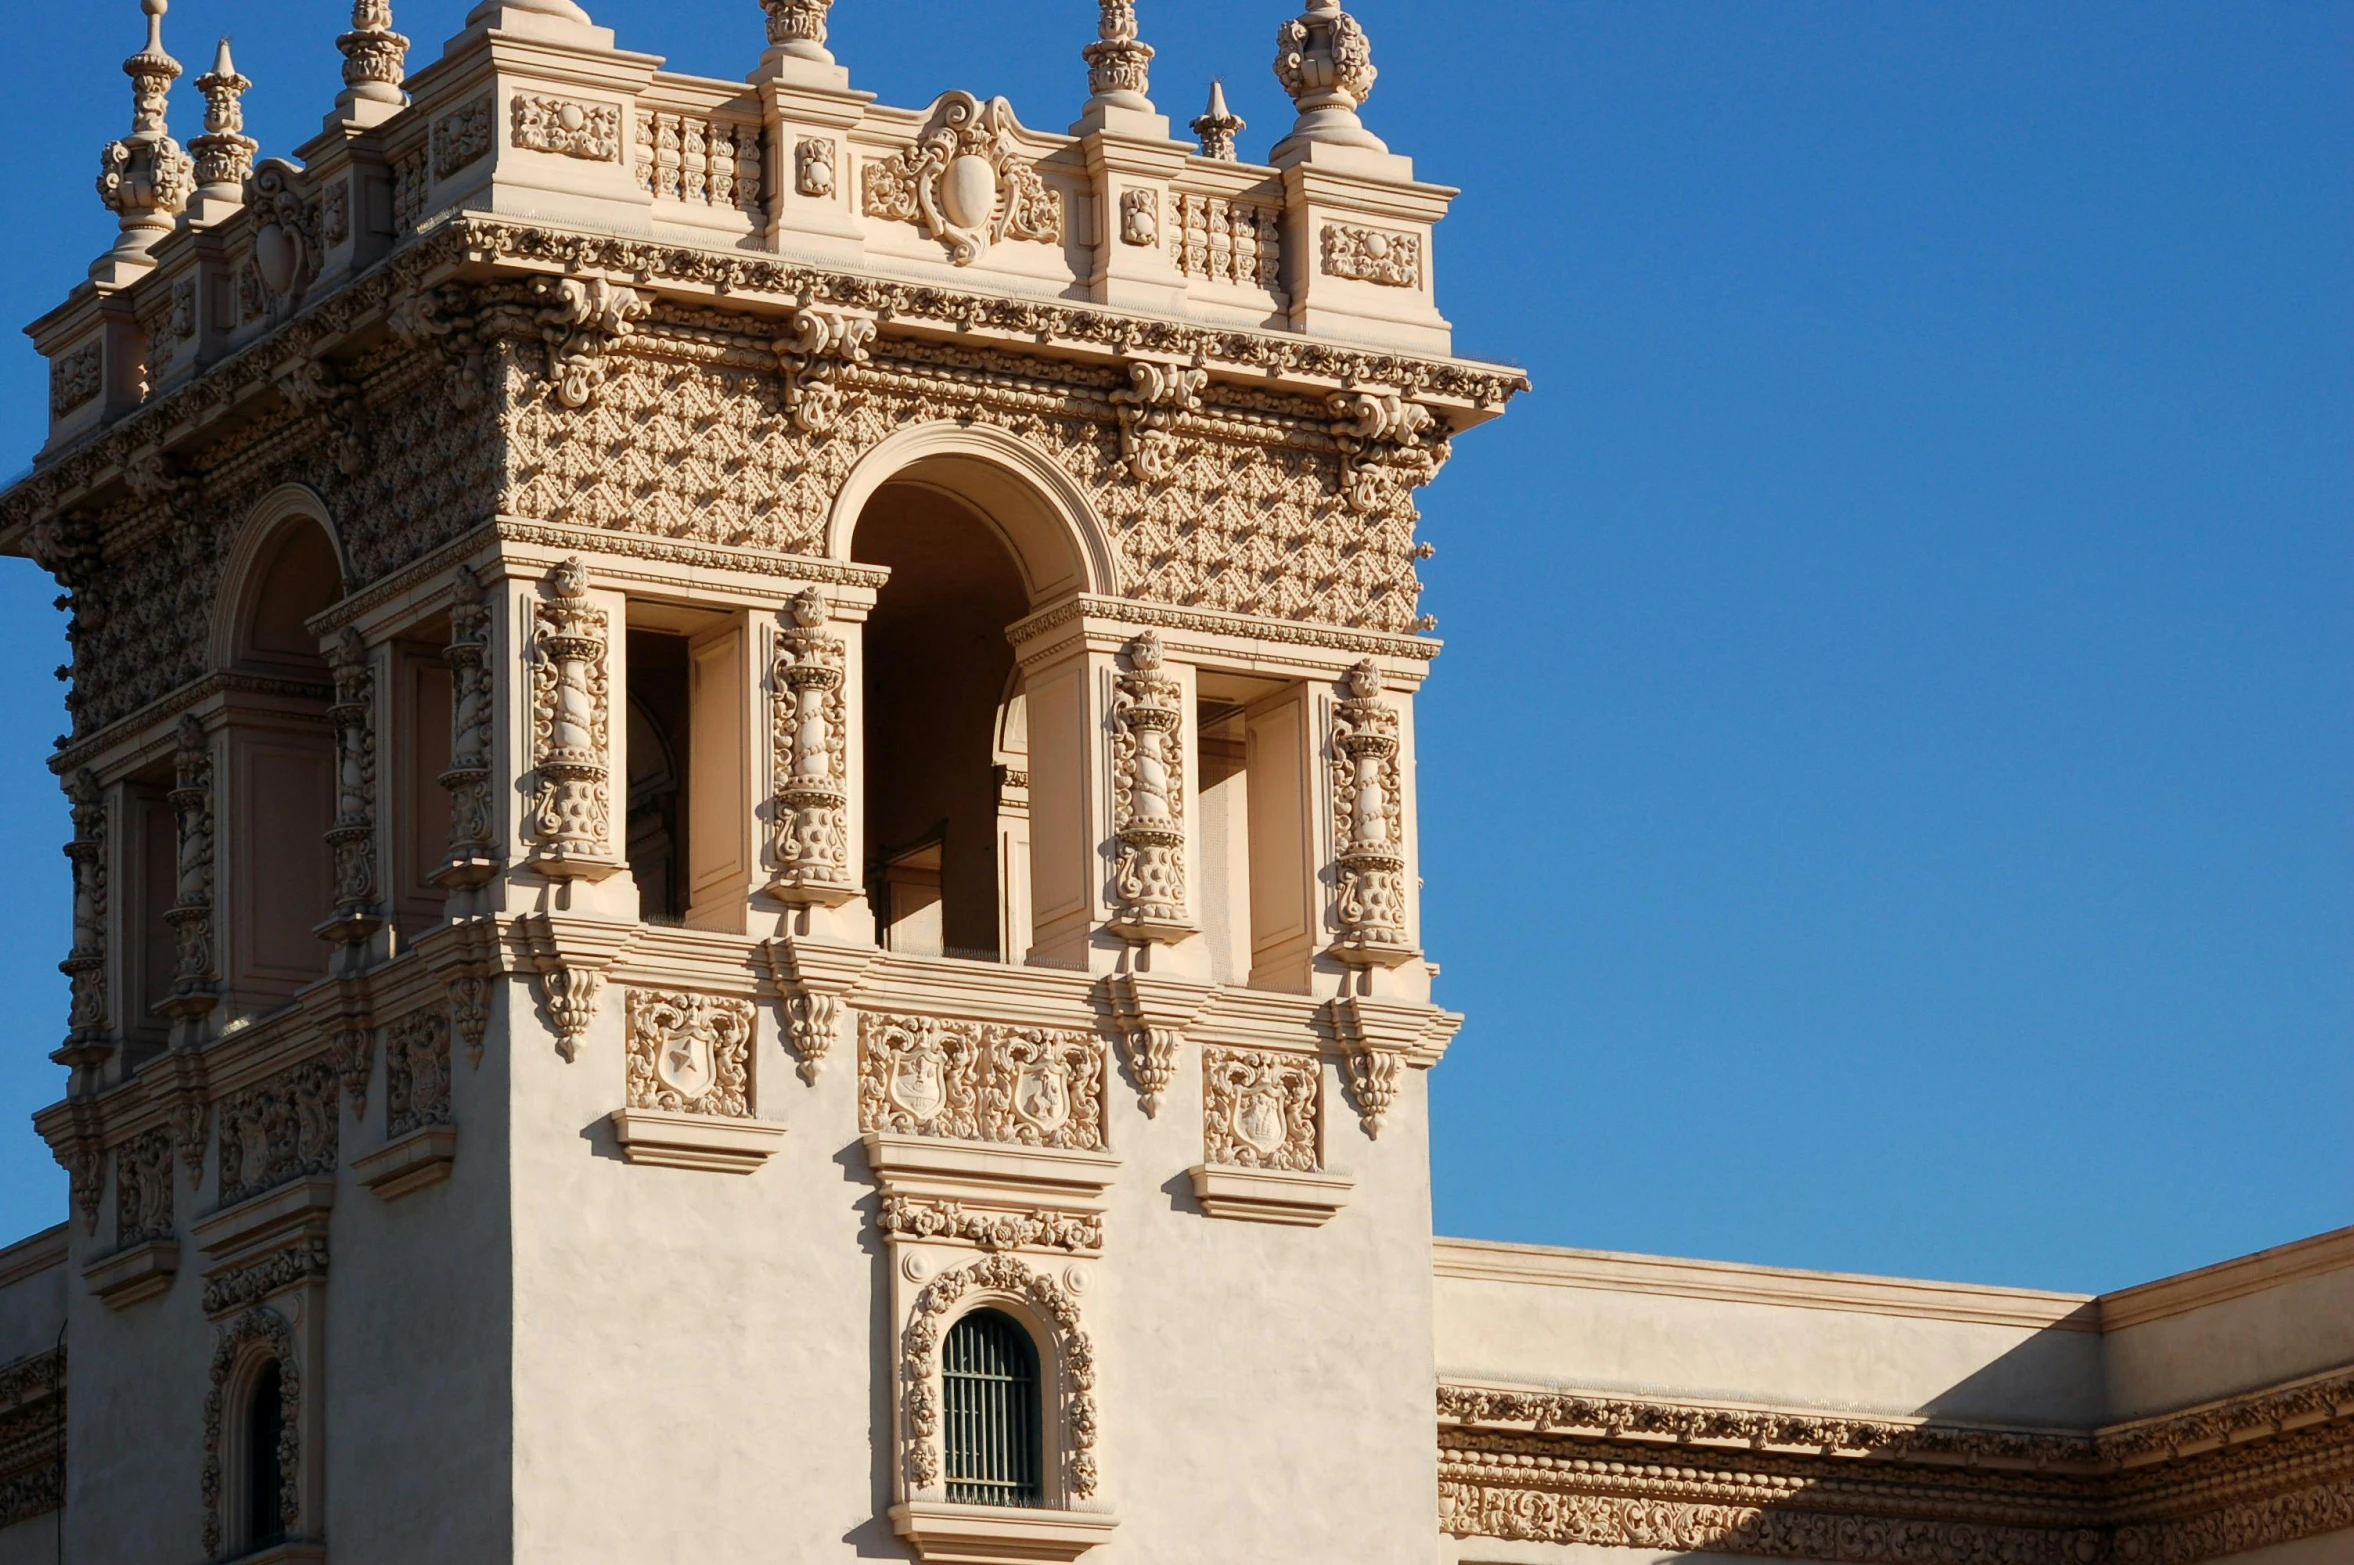 an ornate clock tower on the side of a white building